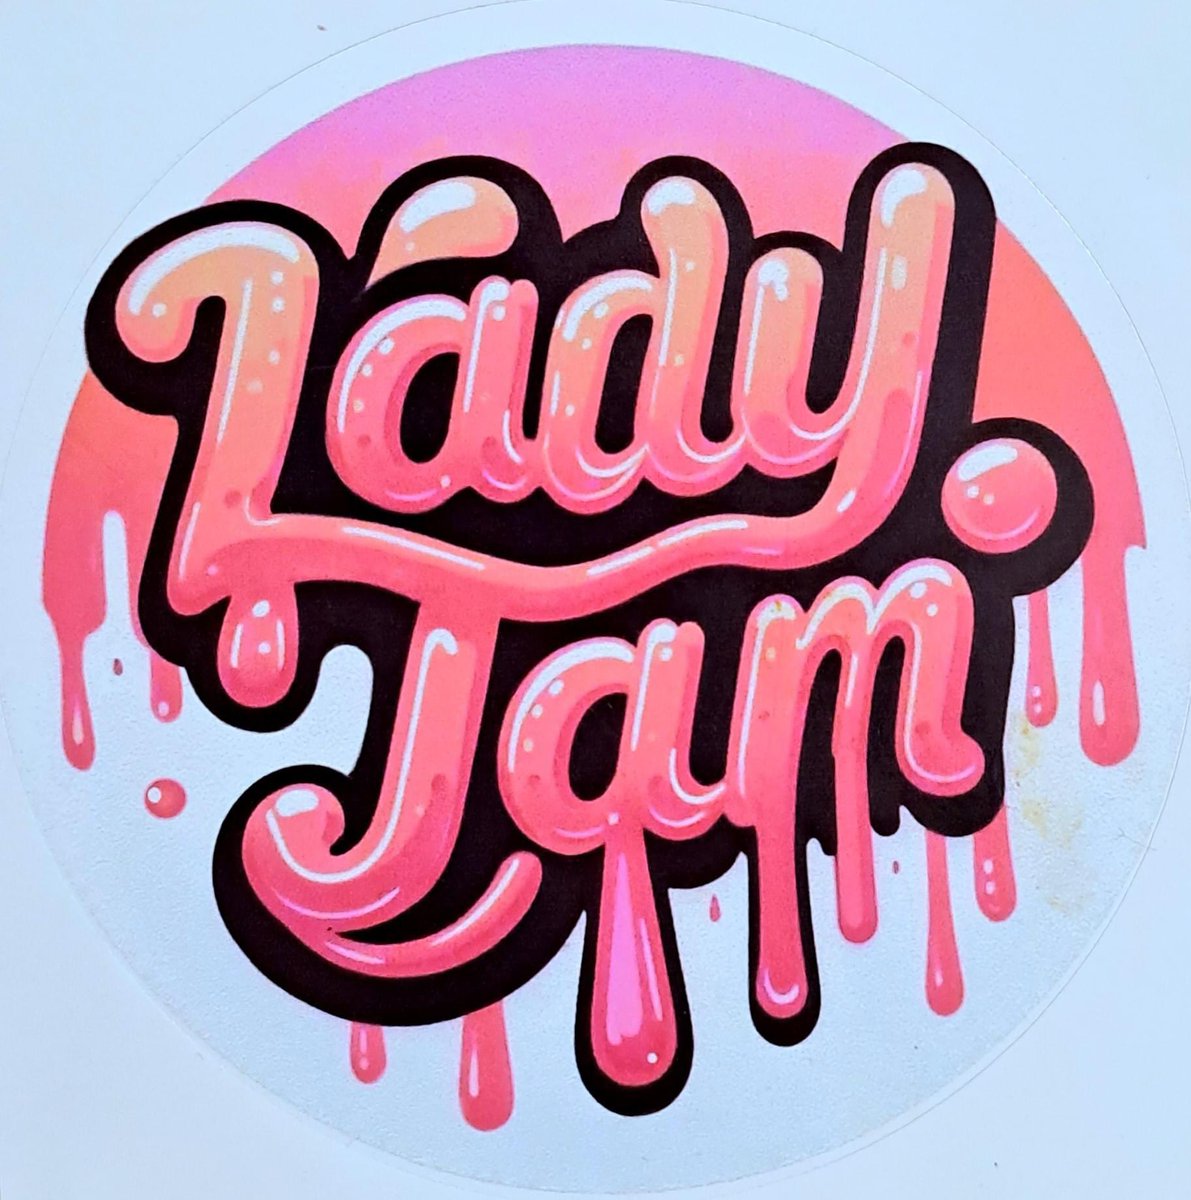 This wknd sees 9 female artists come to Southsea and do a live paint Jam! Nicknamed LadyJam it brings a focus to one road in Southsea. southseafolk.uk/lady-jam/ #southsea #portsmouth #ladyjam #streetart #paintcans #spraypaint #streetartsouthsea